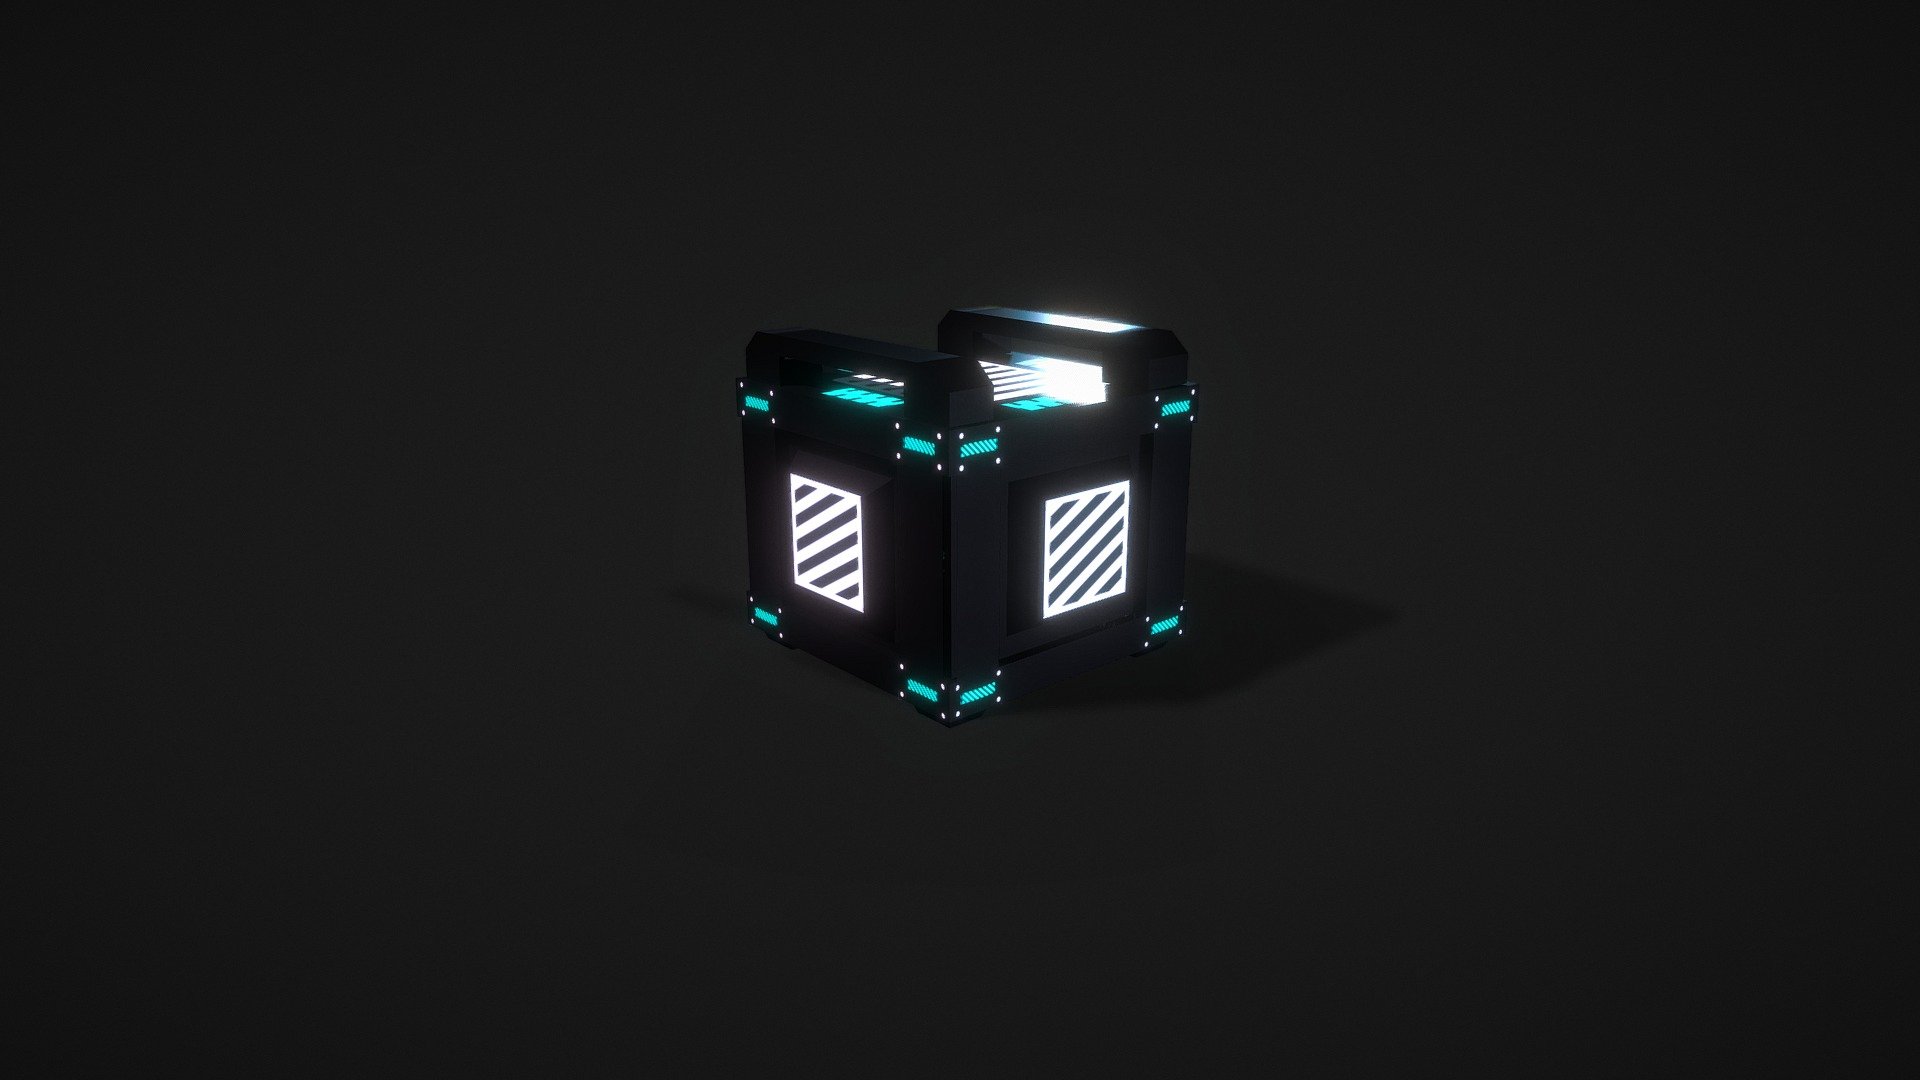 This is a low-poly box created for a little scene I did. 

I used 3D Max and Substance Painter 3d model